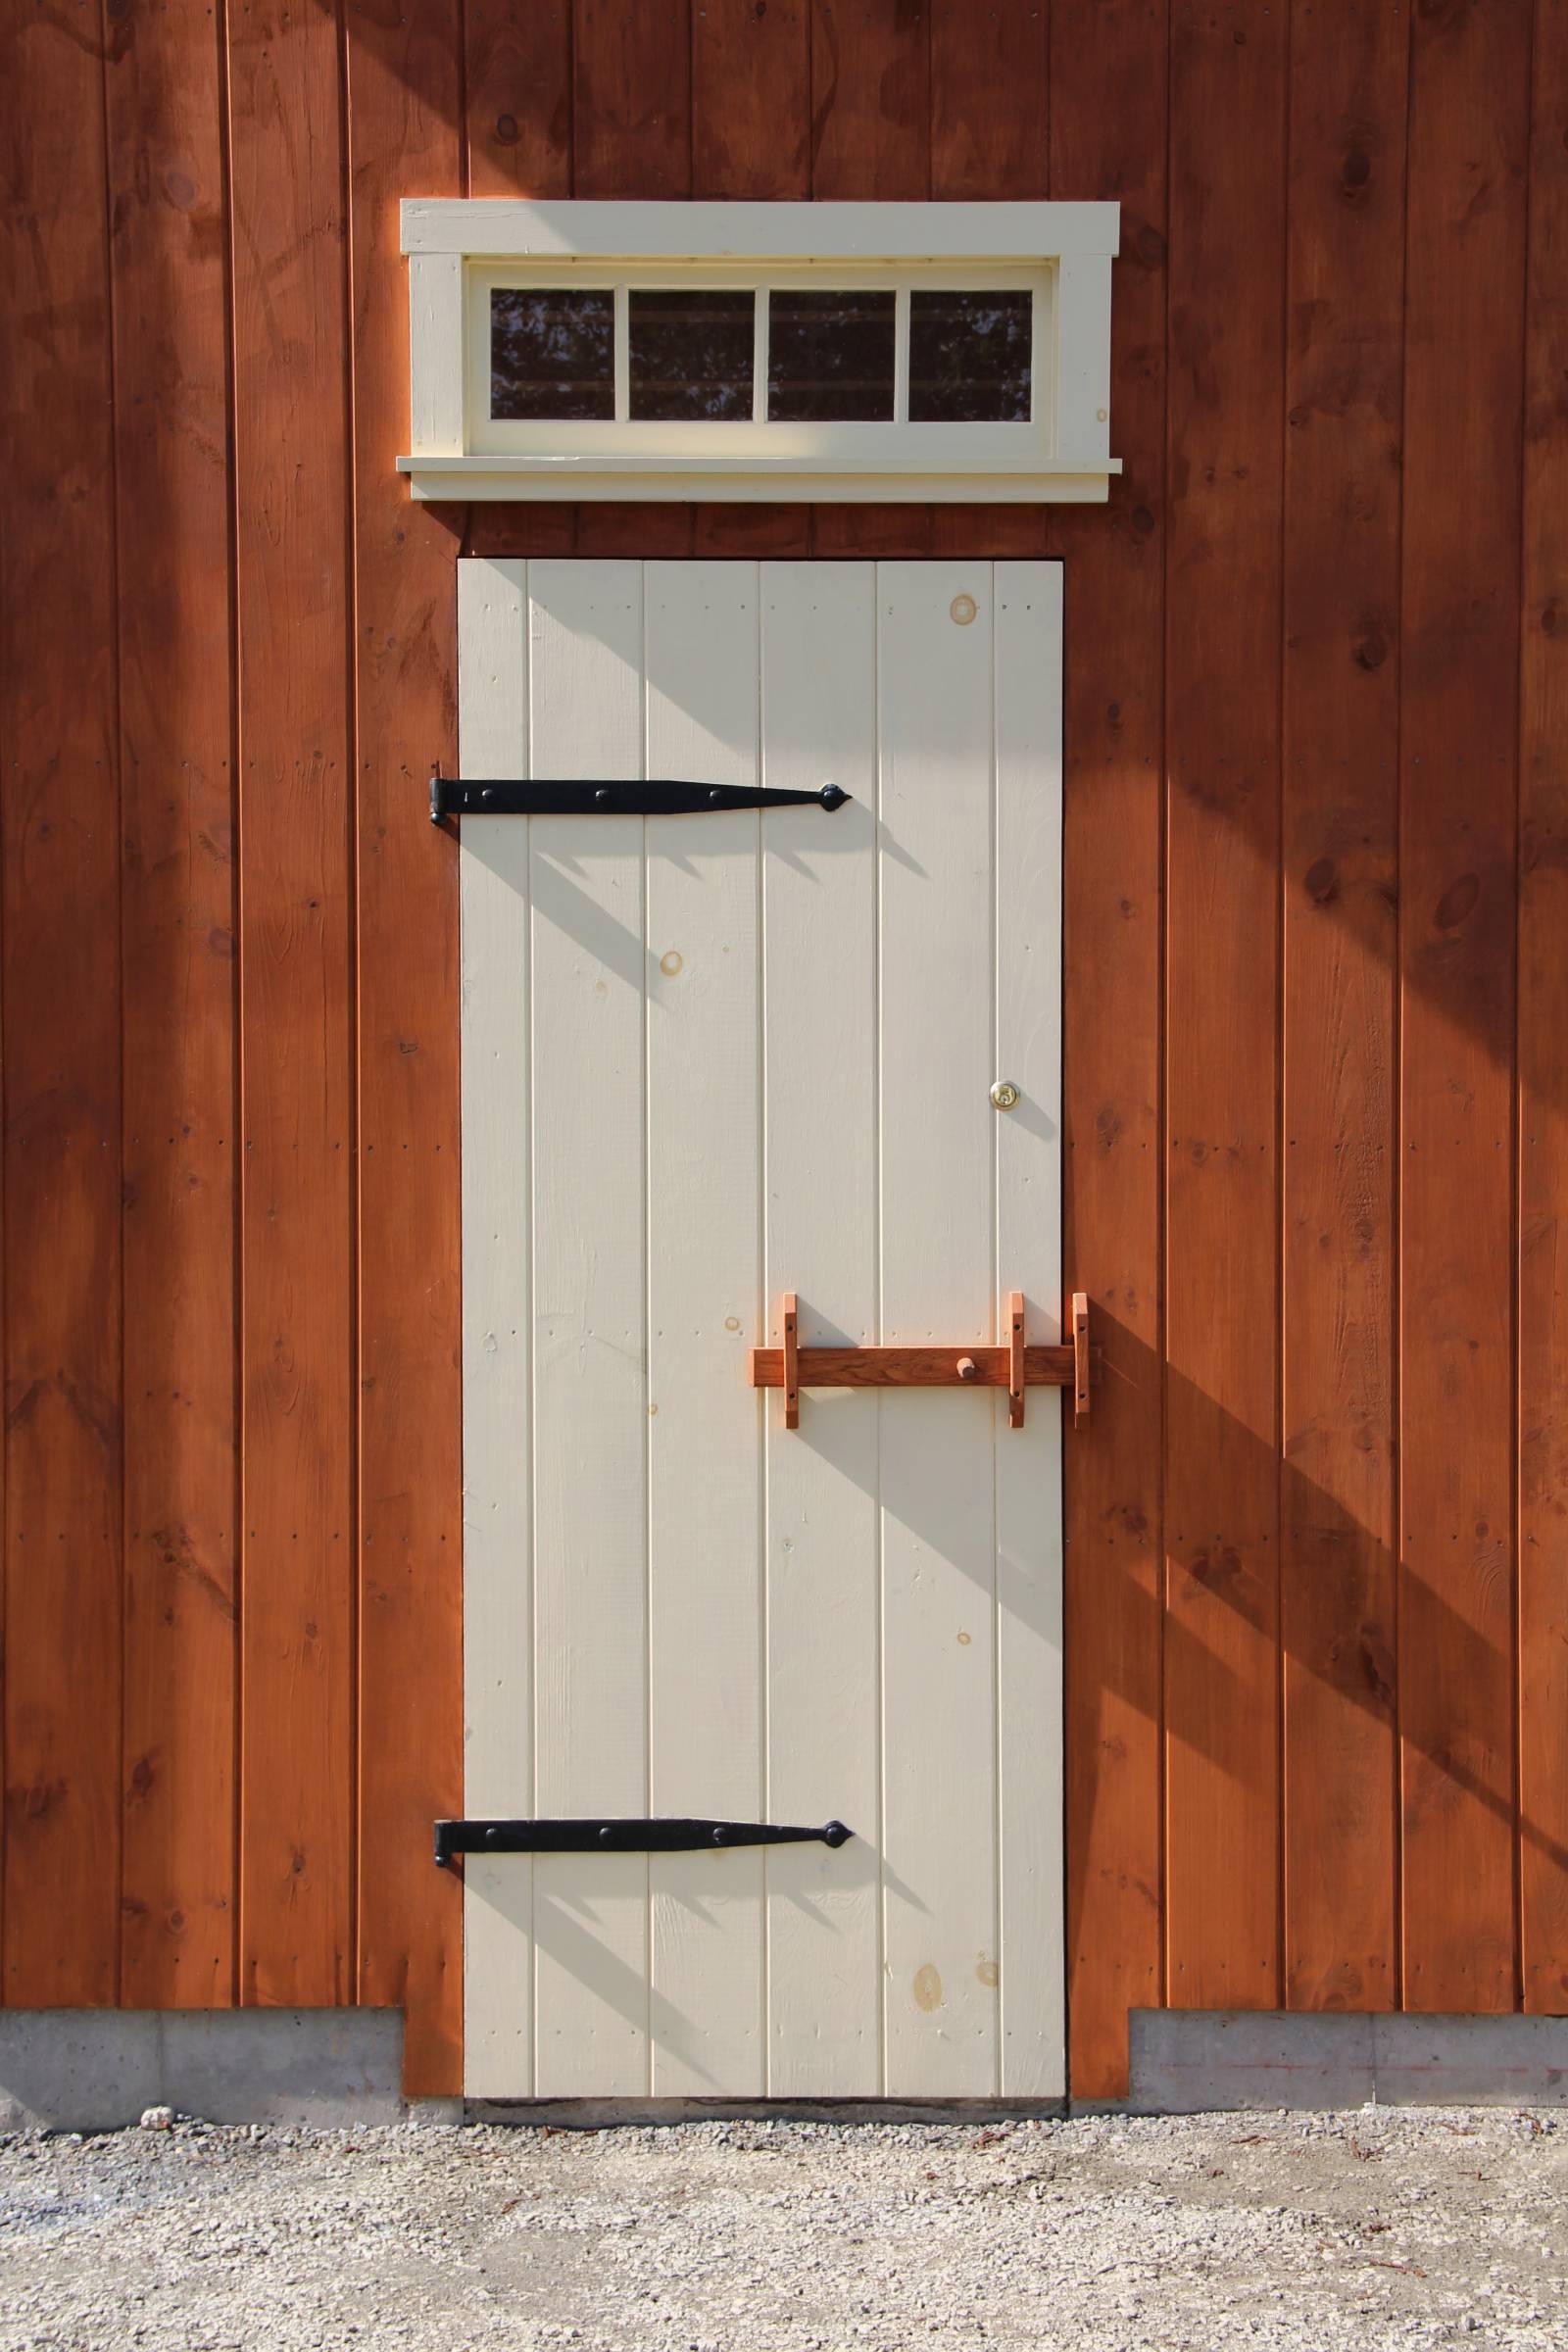 Entry Door with Sliding Oak Latch • Hand Forged Strap Hinges • Transom Window Above